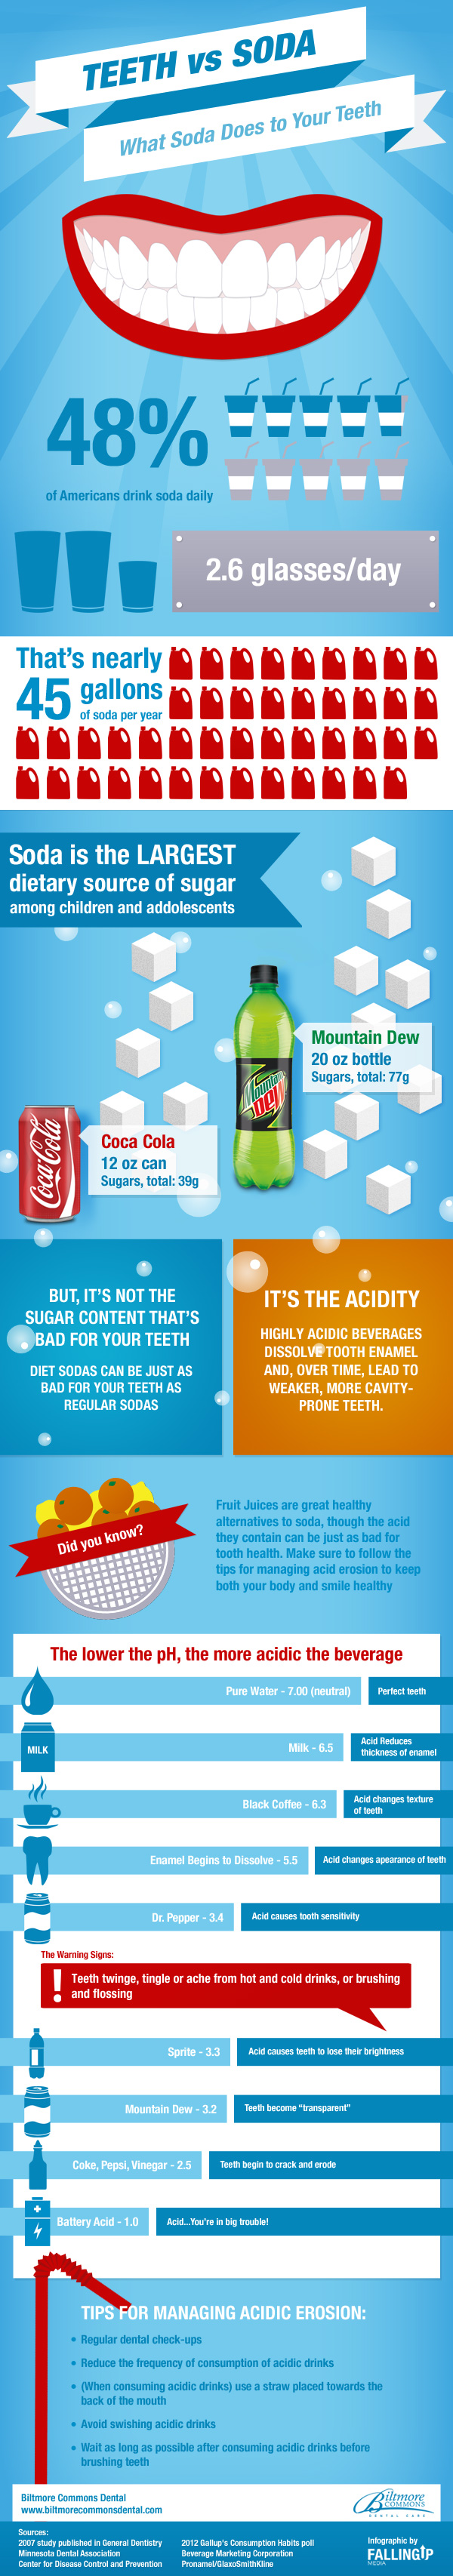 Is Soda Really Bad For Your Teeth? Infographic